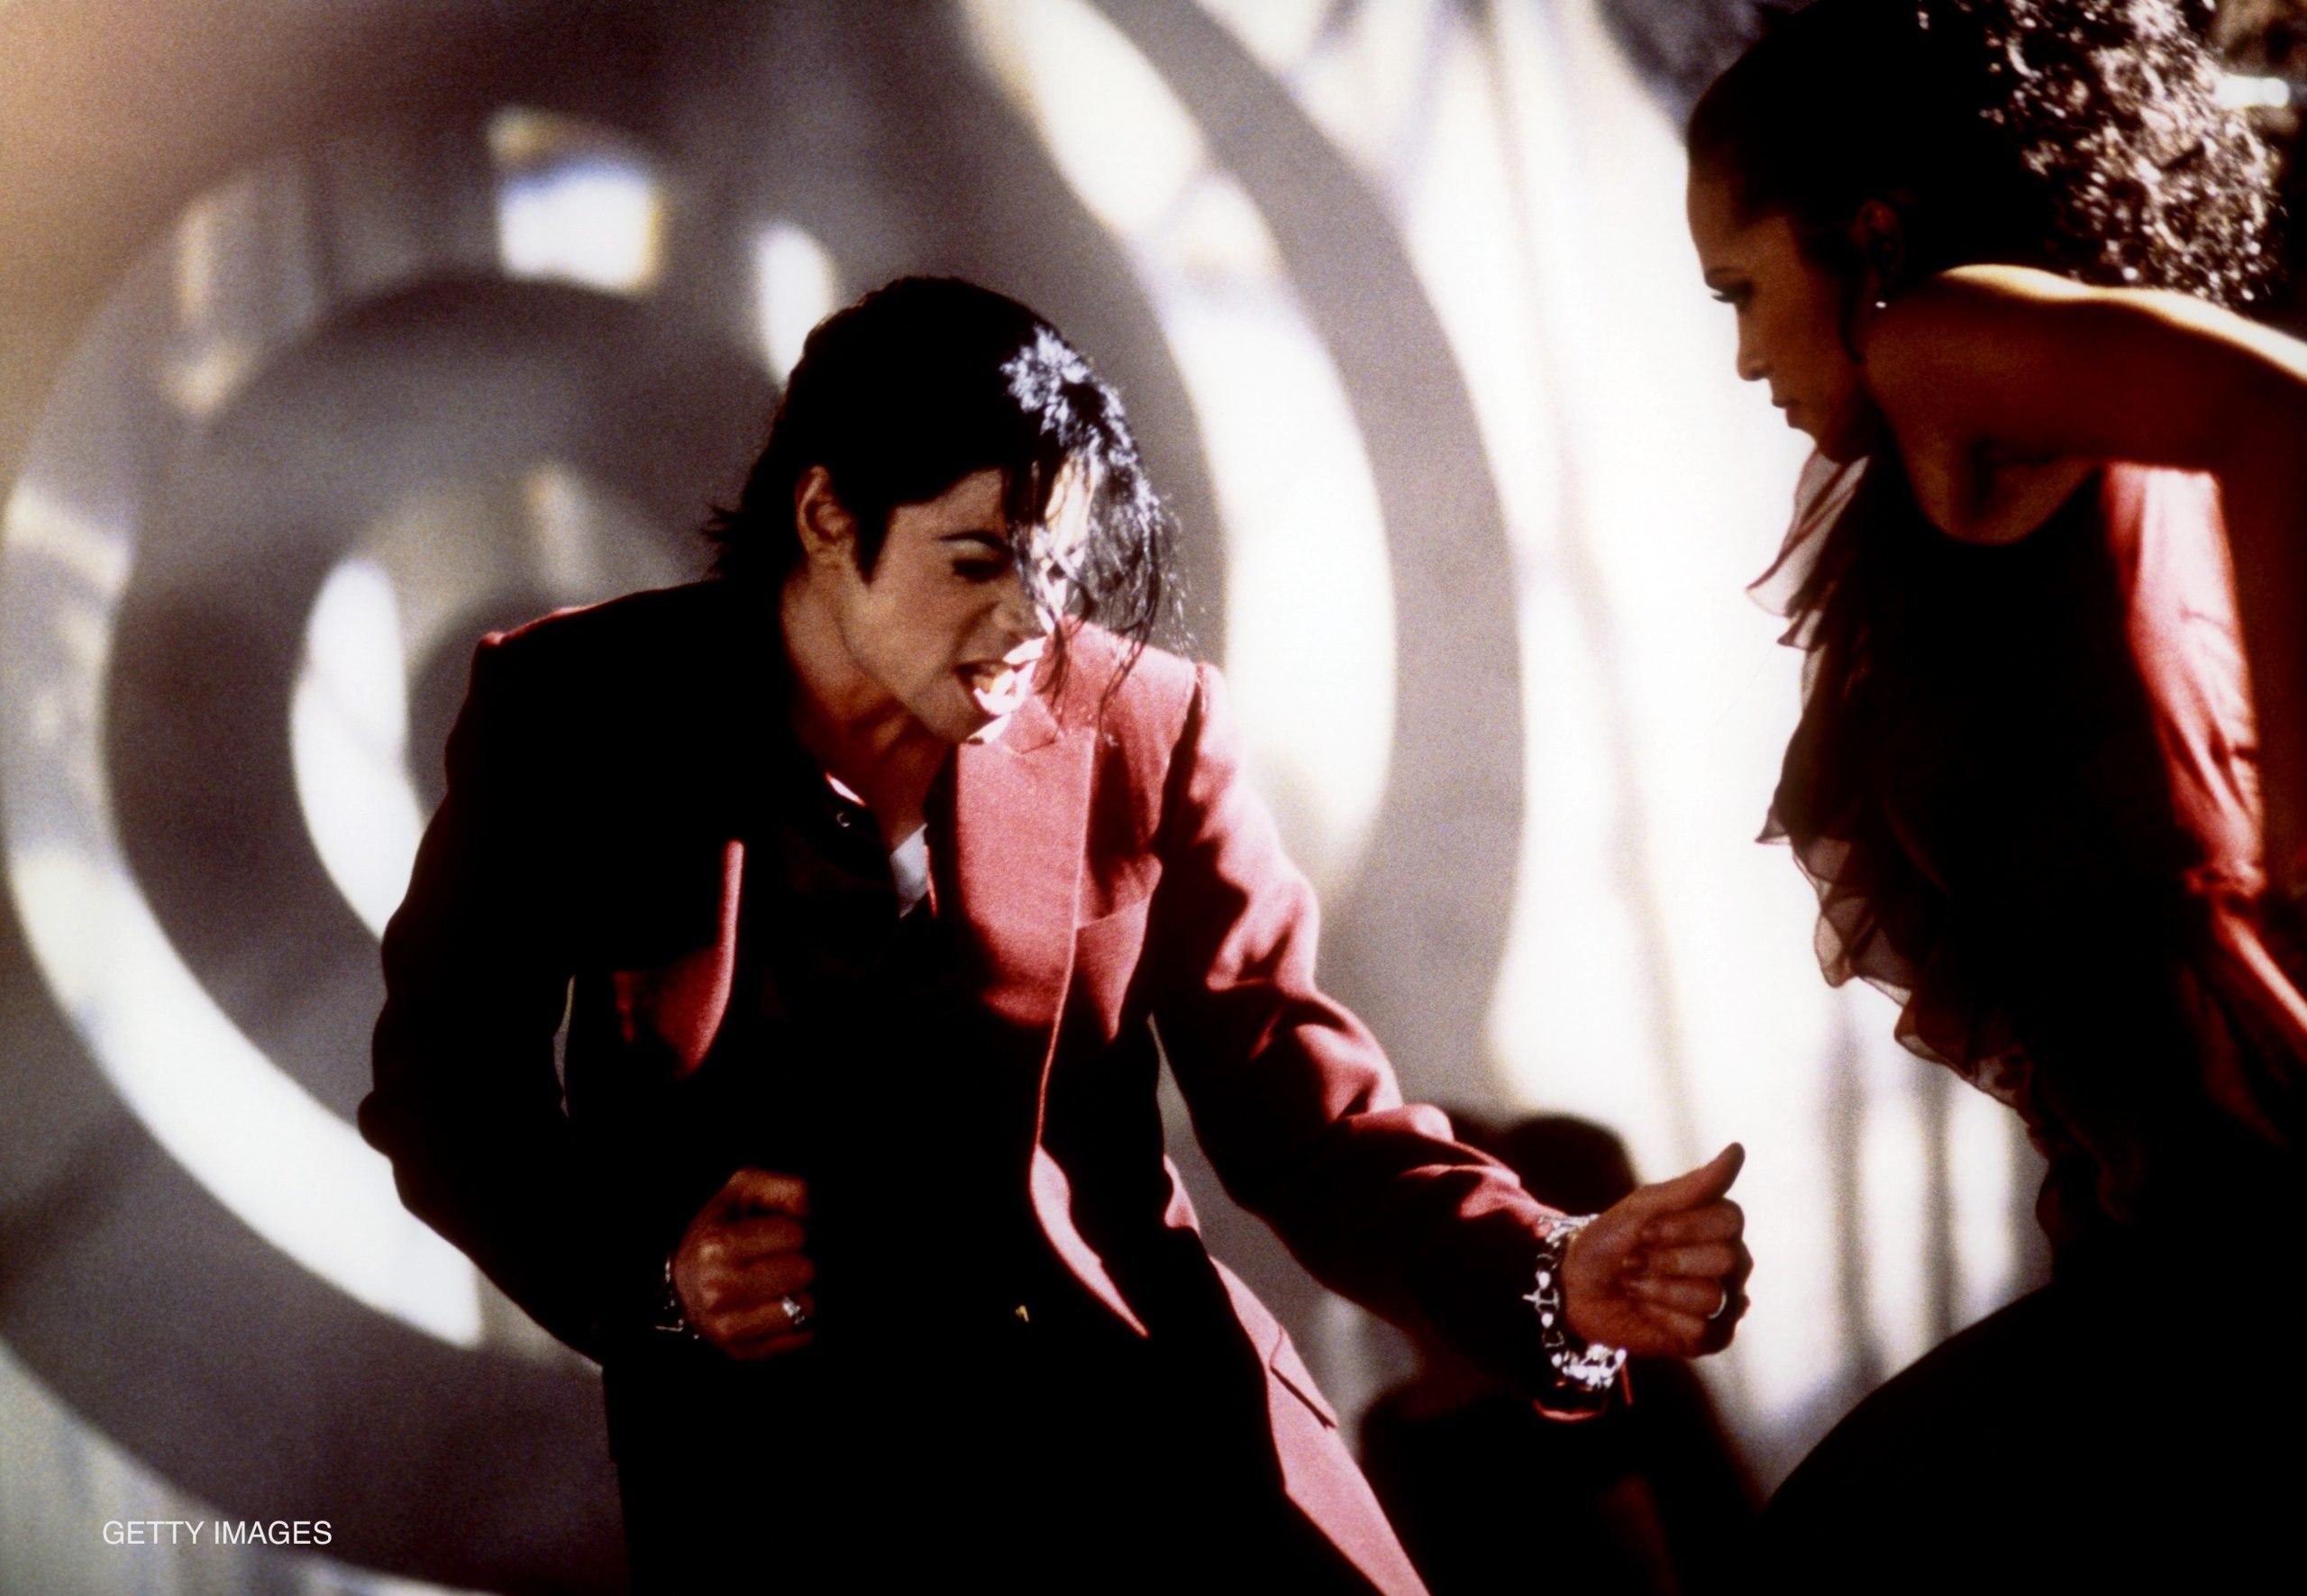 MJ’s ‘Blood On The Dance Floor’ Debuted At #1 In UK In 1997